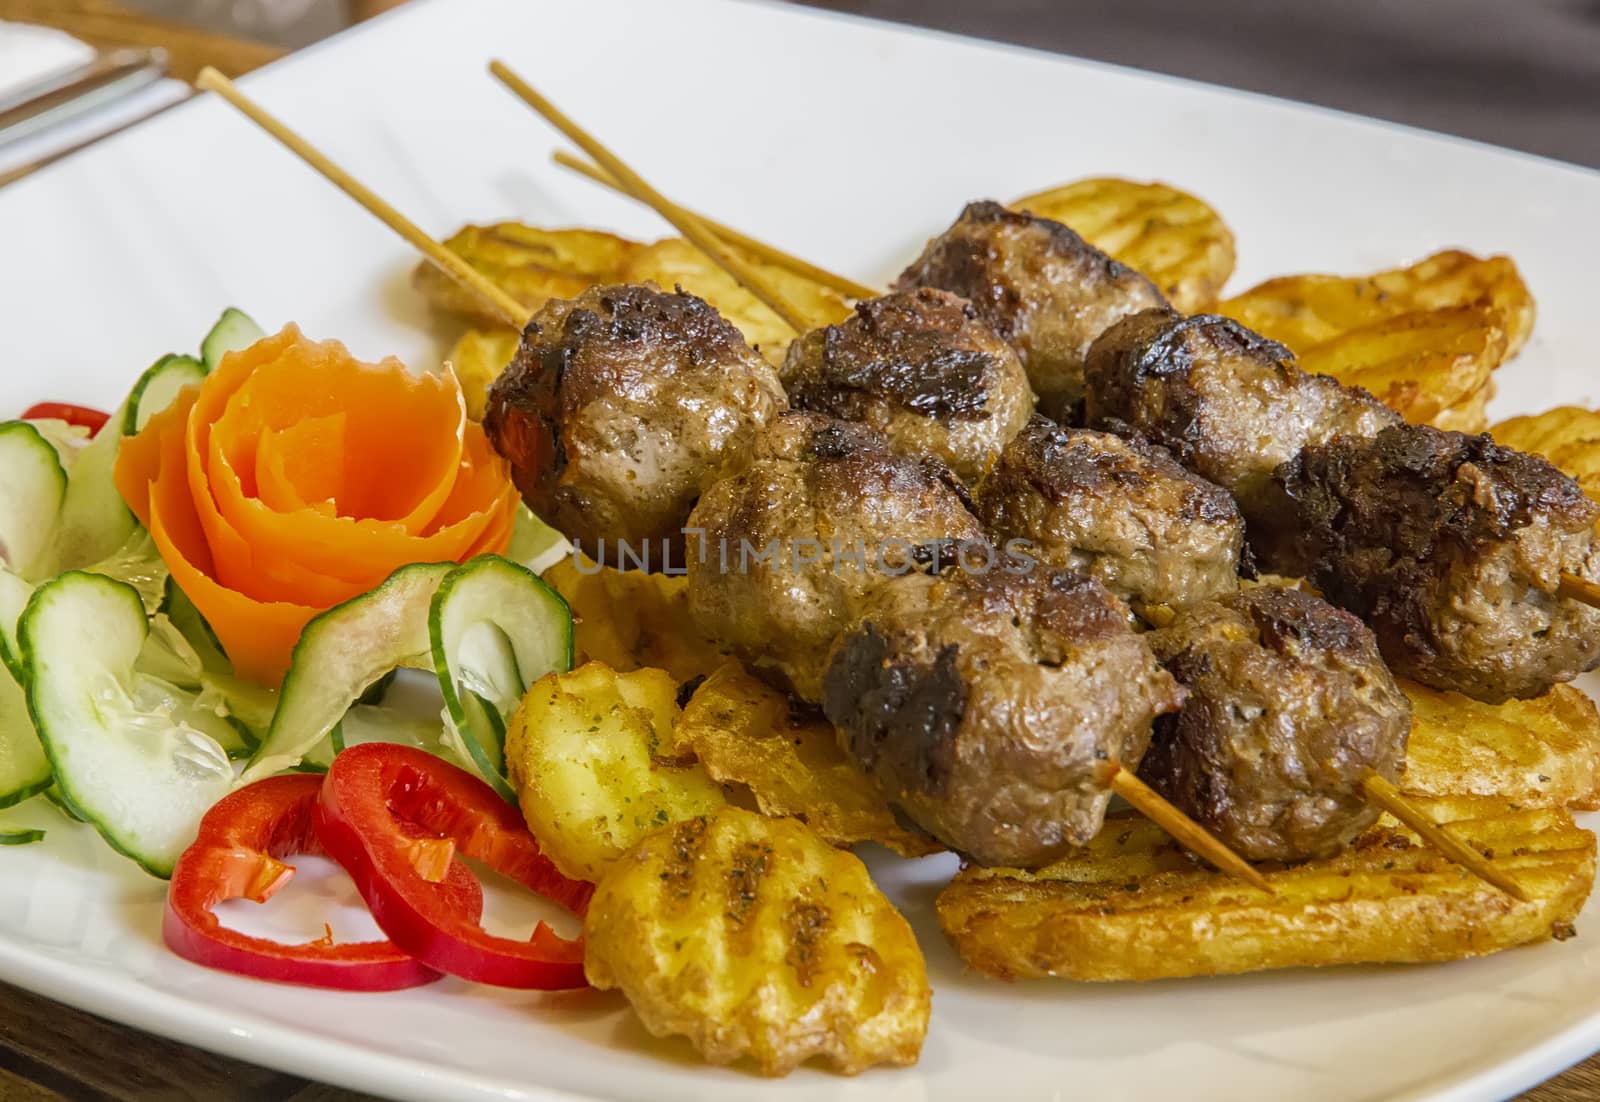 Grilled meat skewers with garnish, close up view